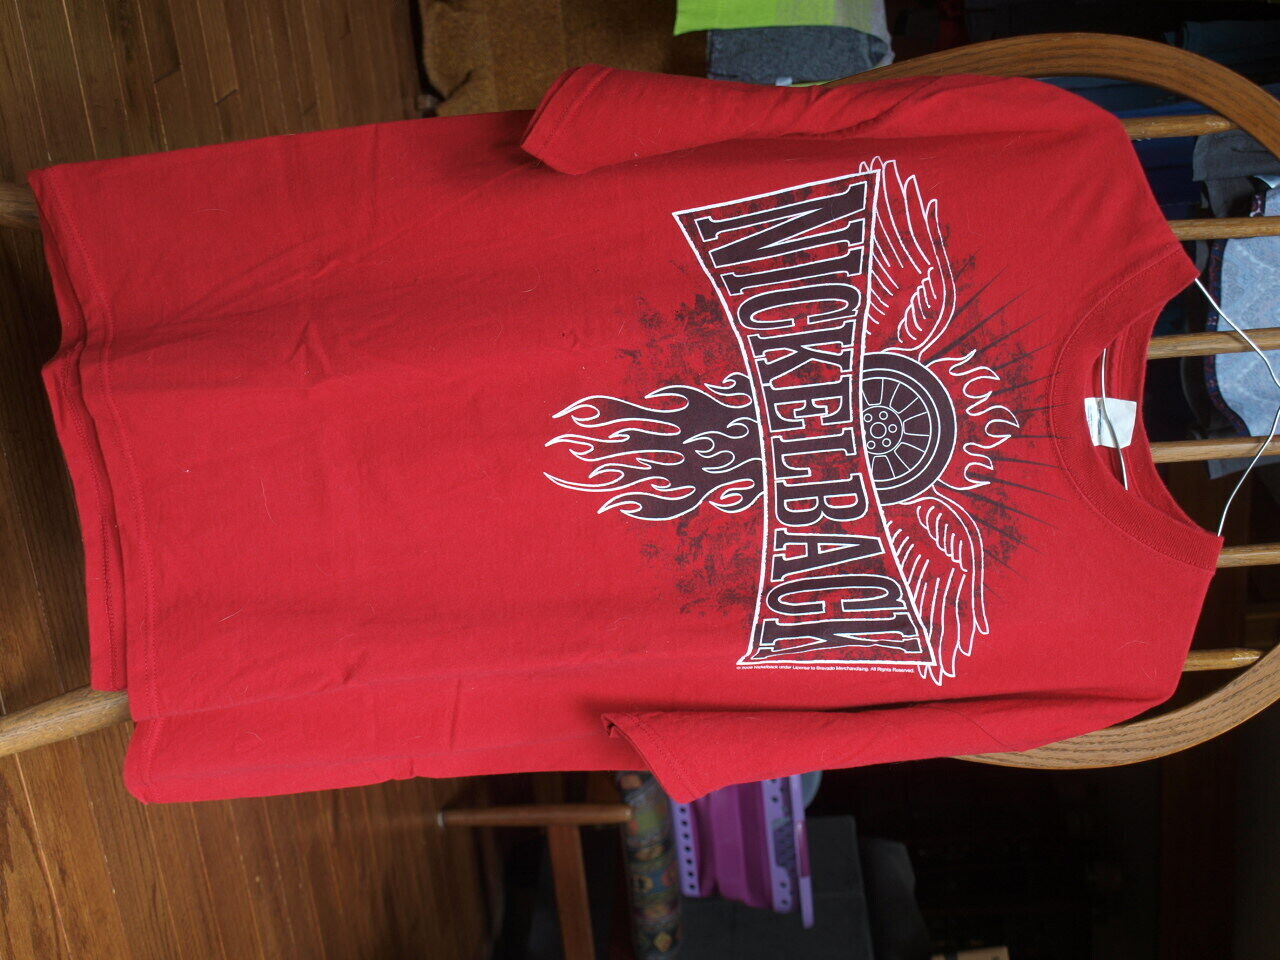 Nickelback Concert Tour T-shirt Dark Horse 2009 Double Sided Red Size Xl Vgc!